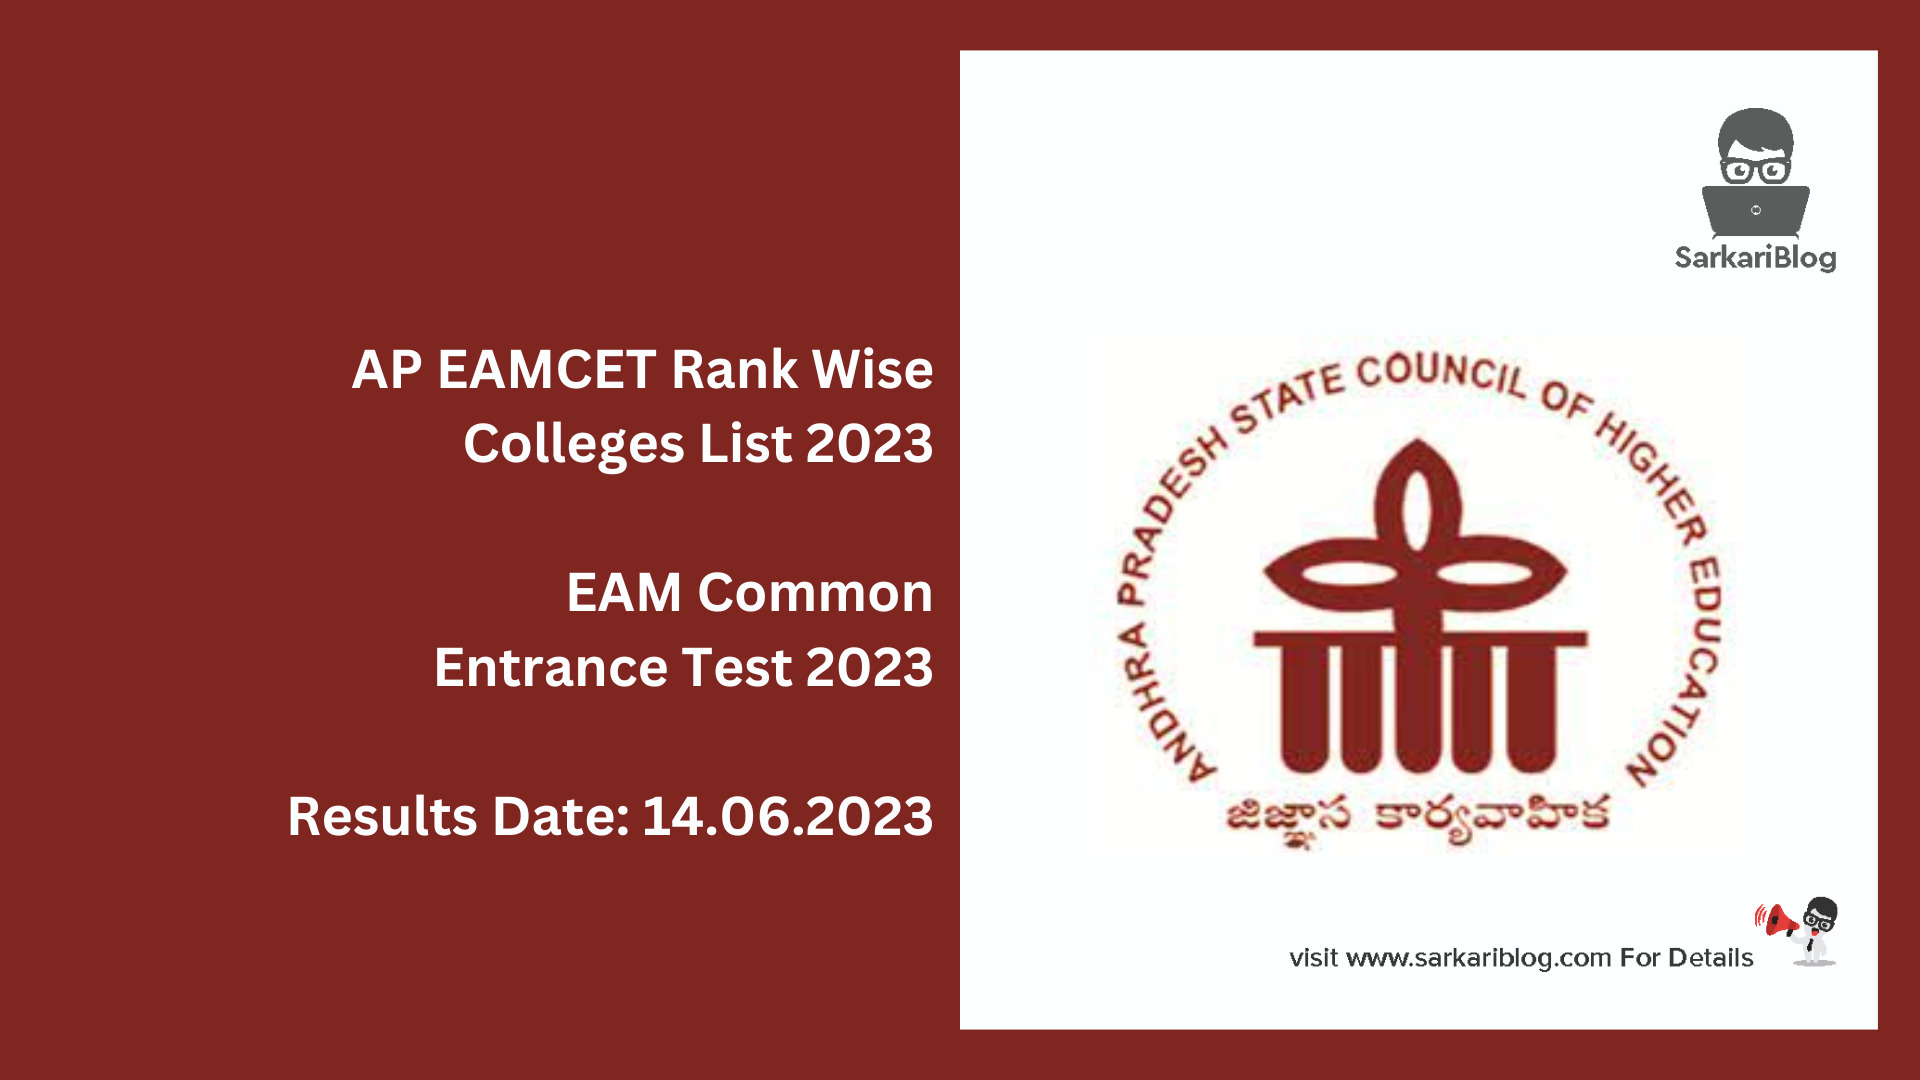 AP EAMCET Rank Wise Colleges List 2023